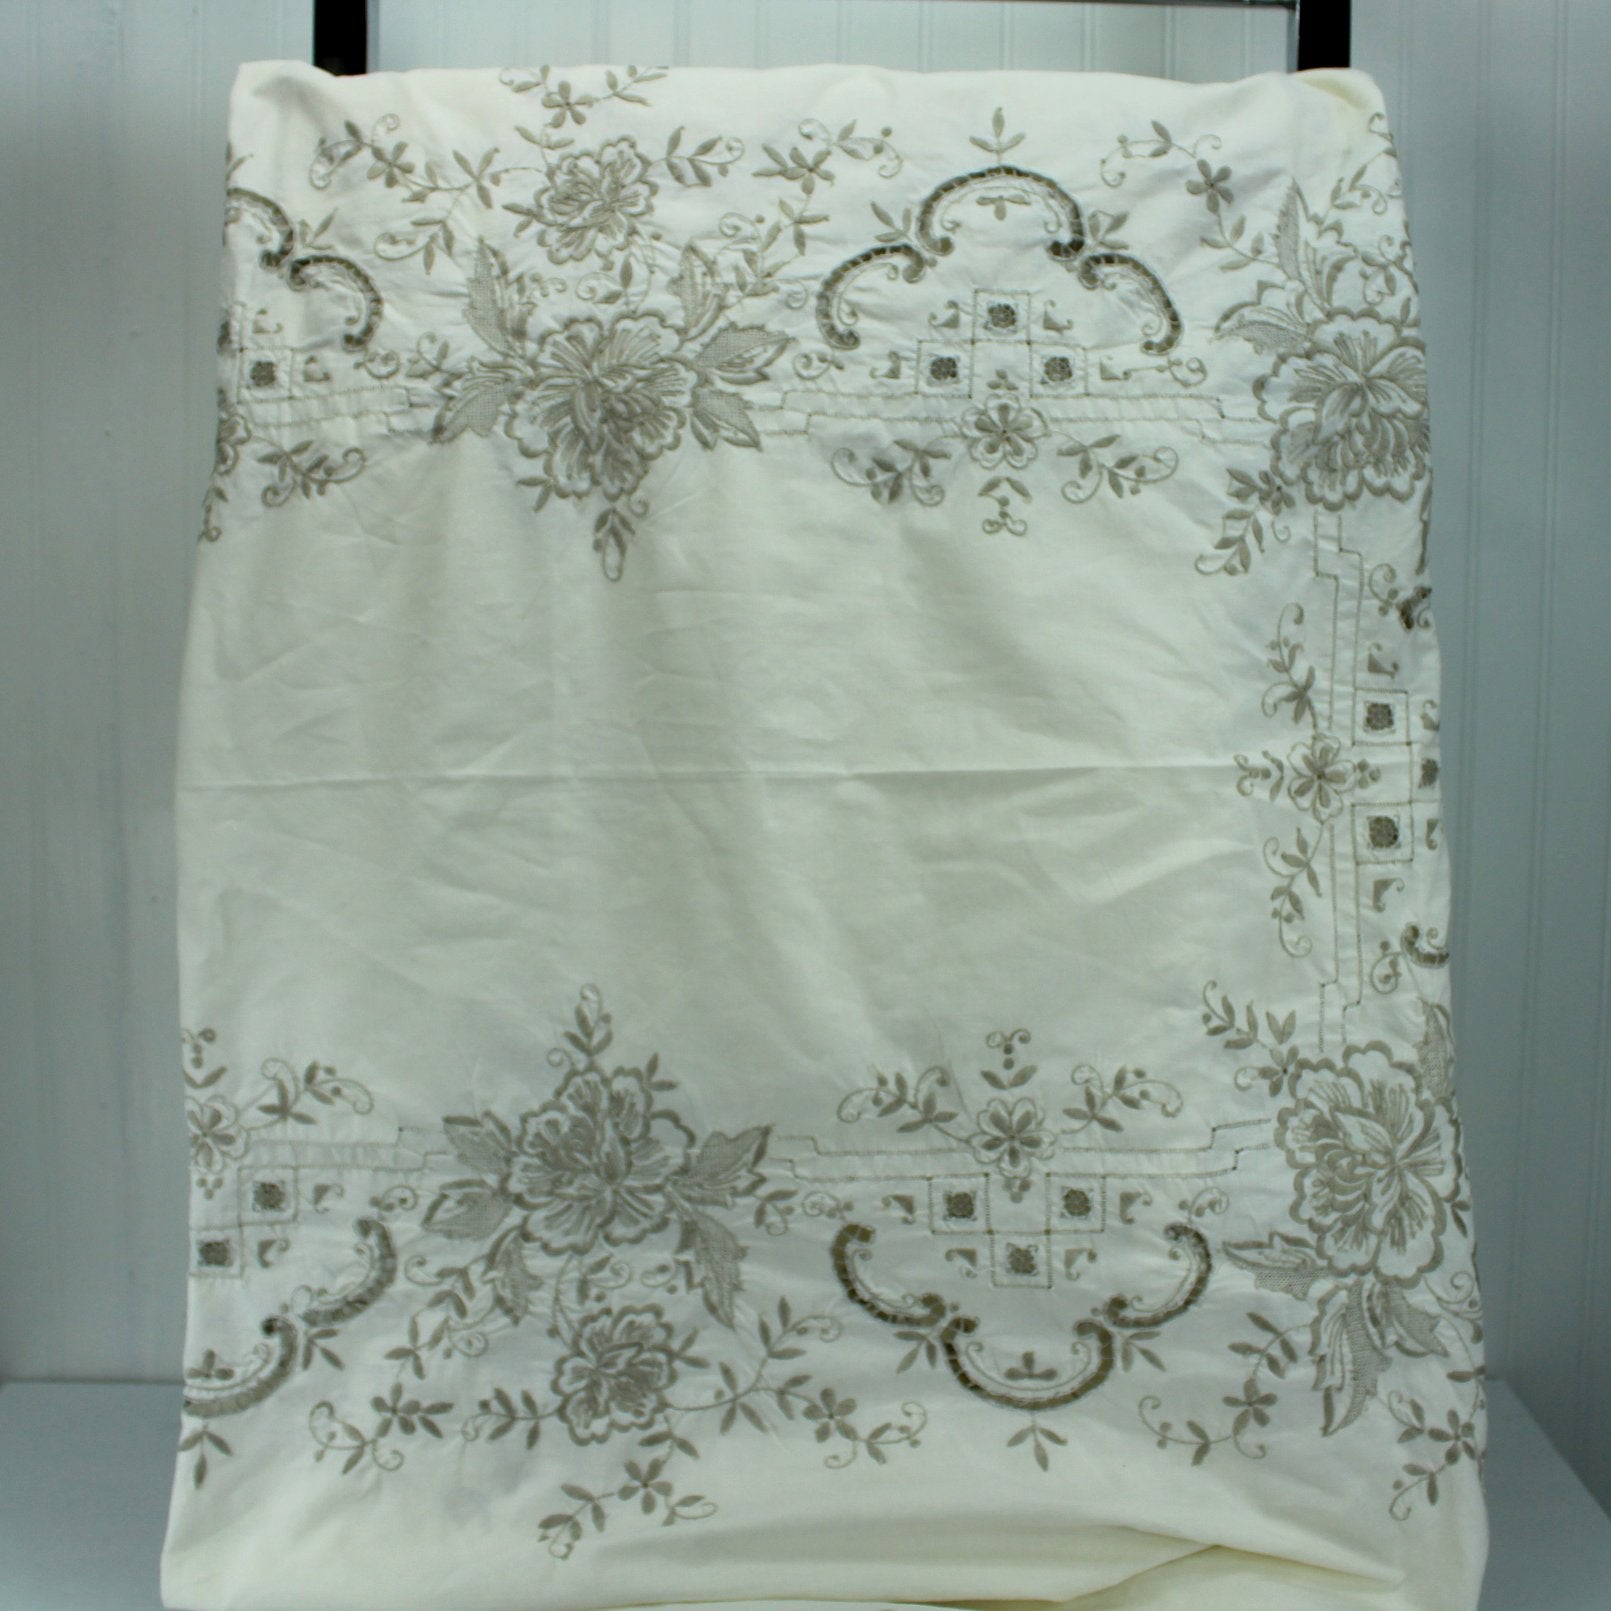 Large Embroidered Tablecloth 12 Napkins Discount Priced 65" X 94" Vintage DIY Fabric medallion detail